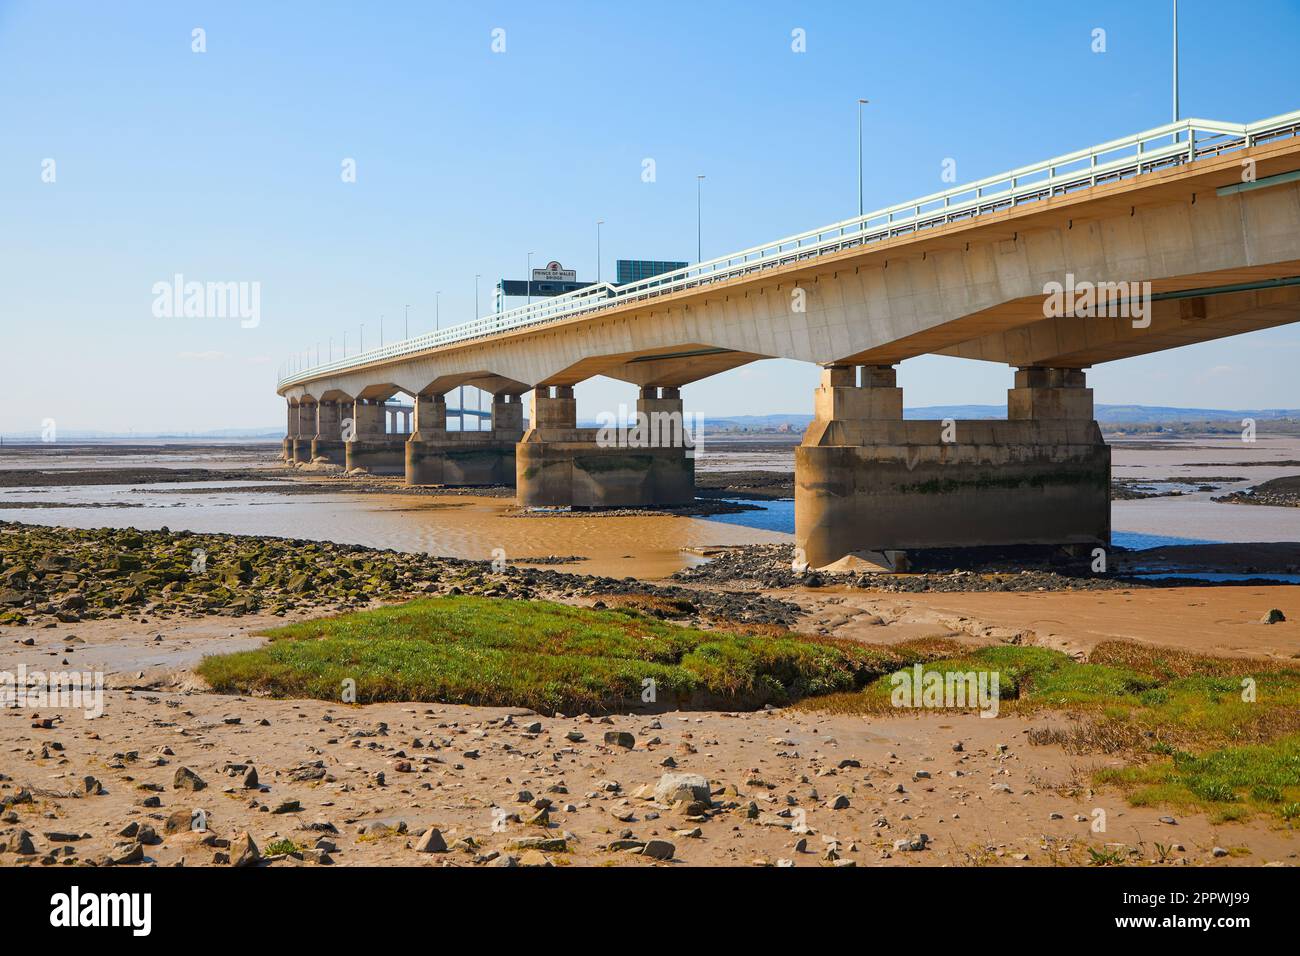 The Prince of Wales Bridge which links England and Wales over the Severn Estuary. Stock Photo